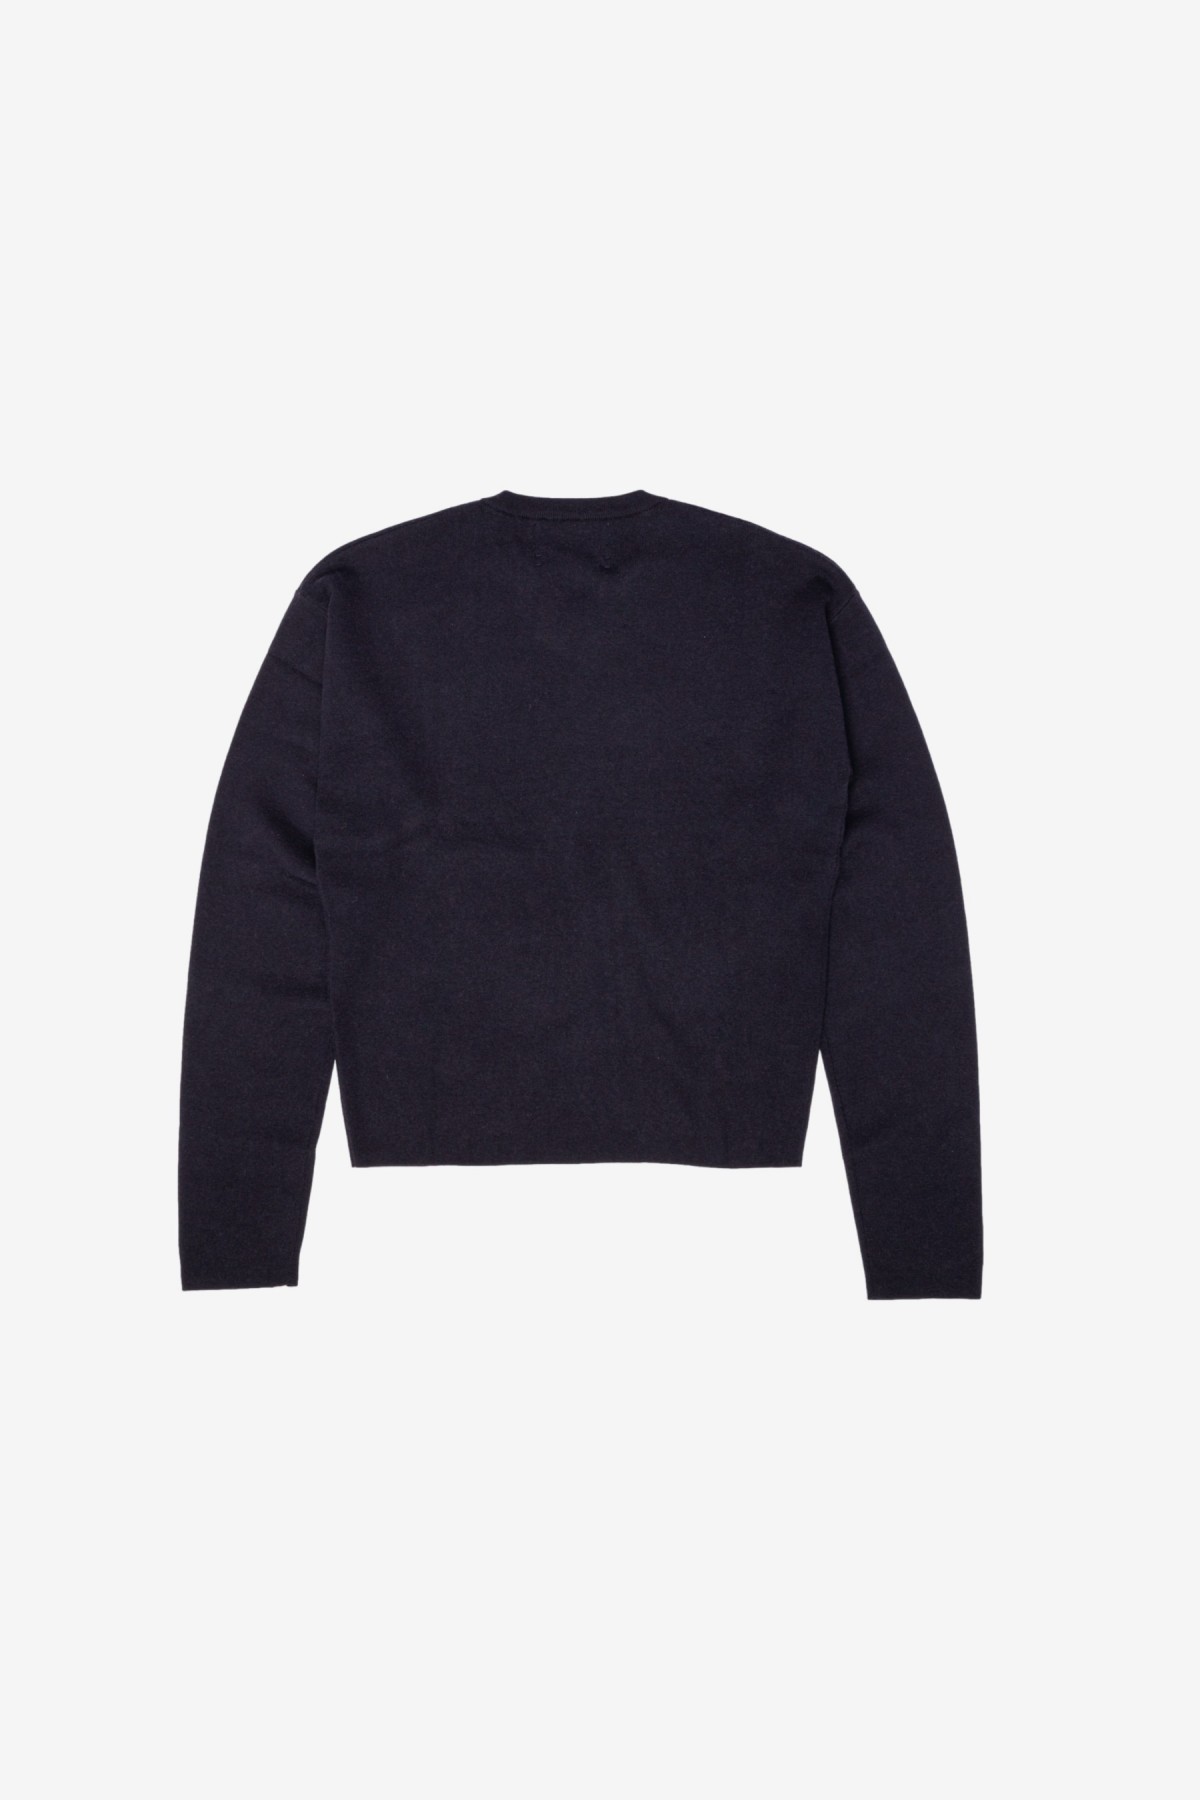 extreme cashmere n°336 ninety in Navy